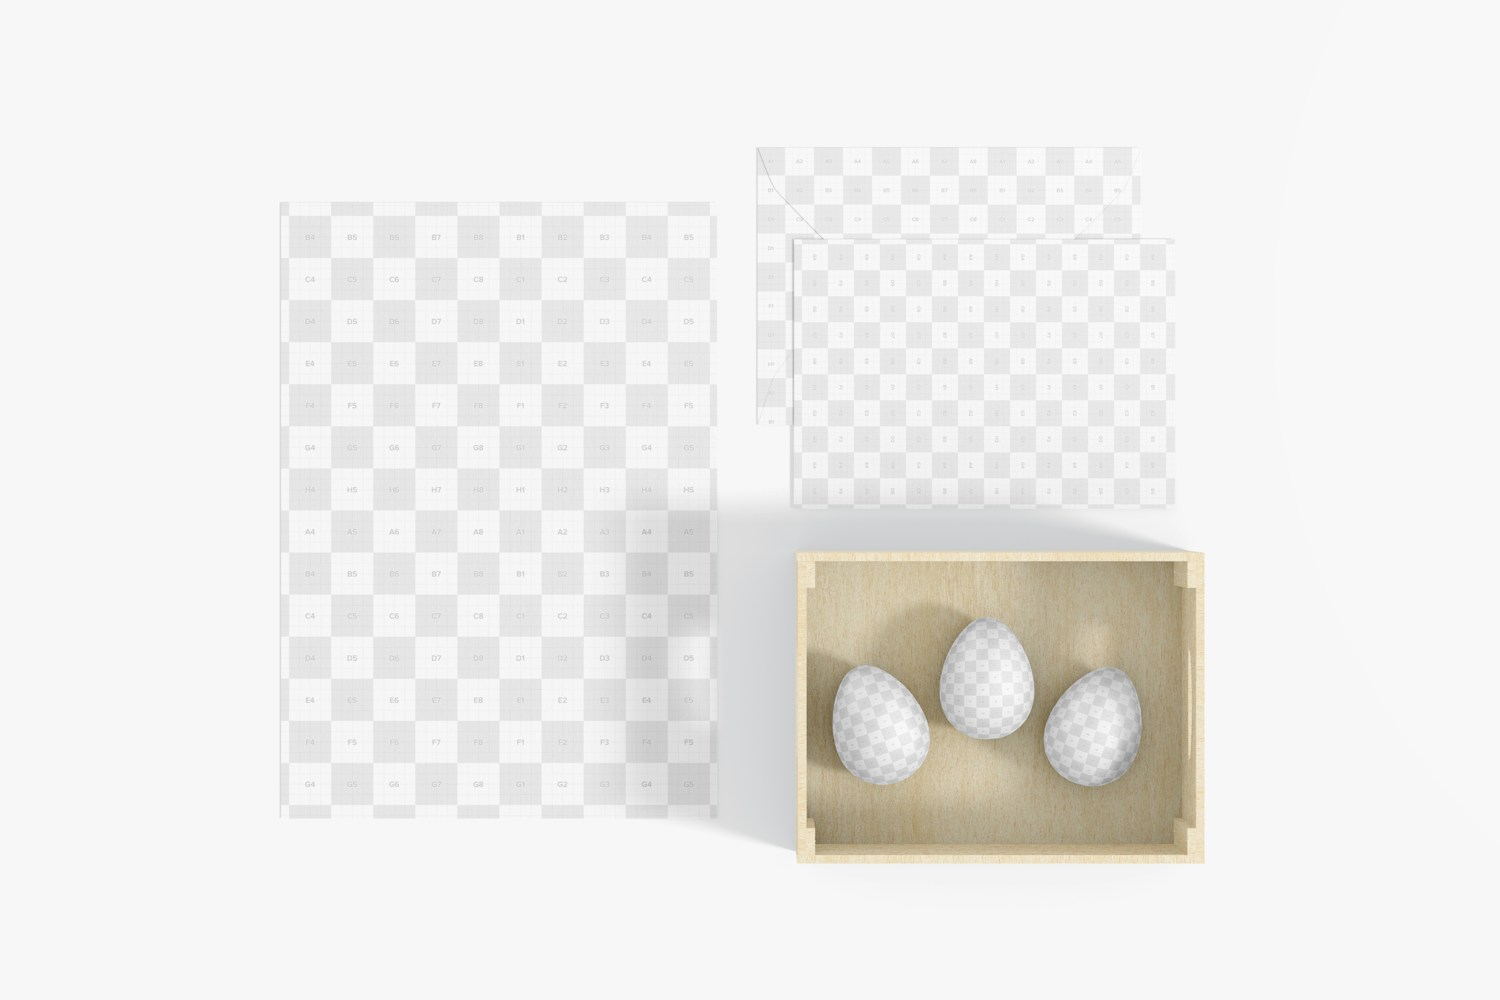 Happy Easter Card Mockup, Top View